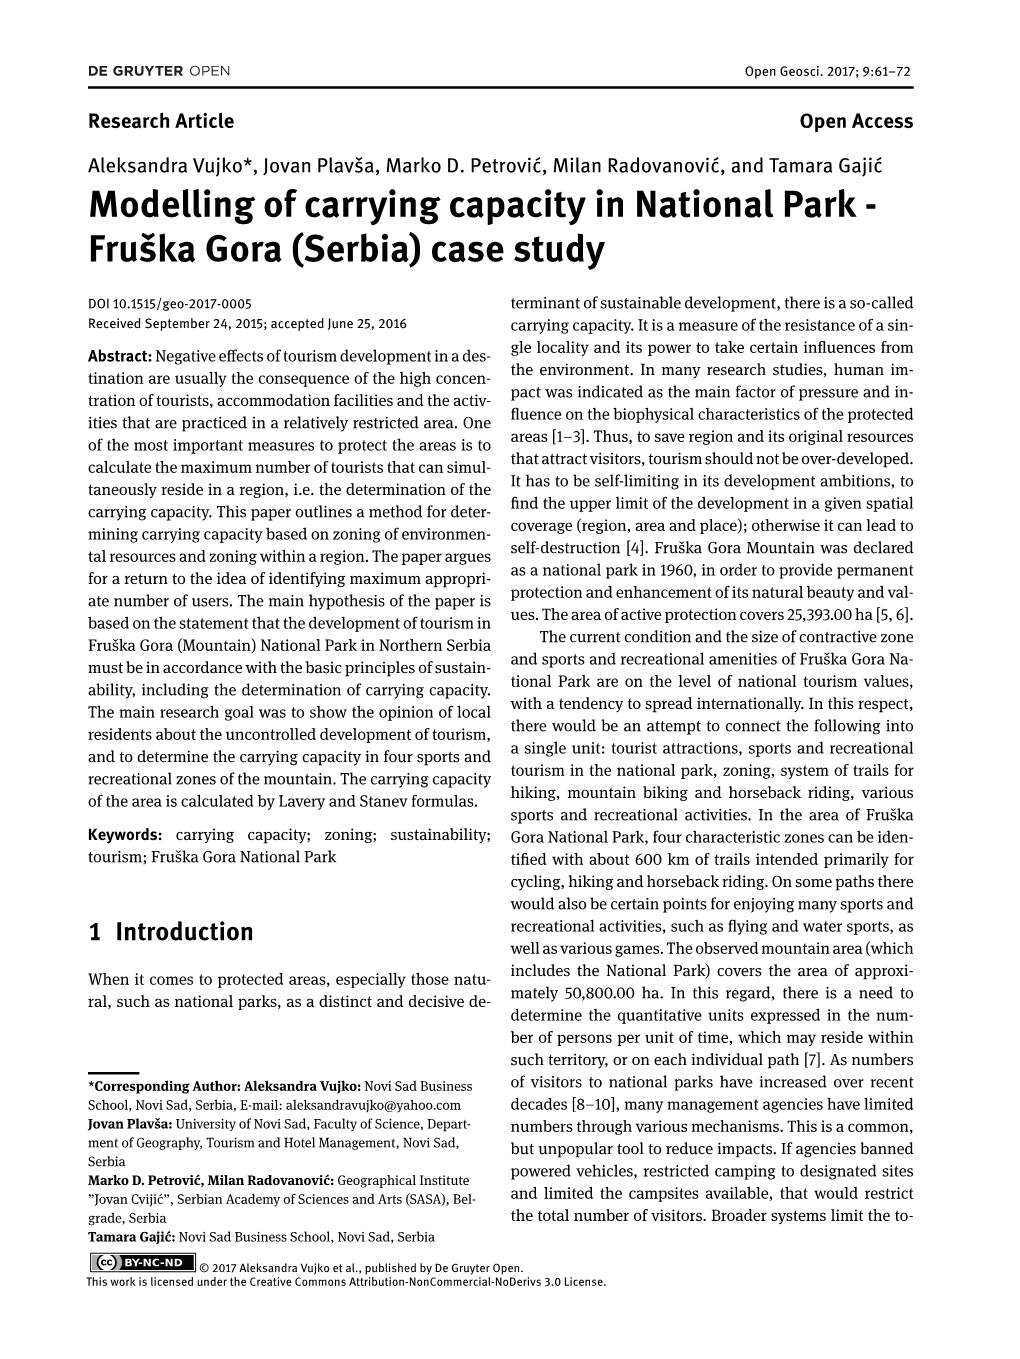 Modelling of Carrying Capacity in National Park - Fruška Gora (Serbia) Case Study